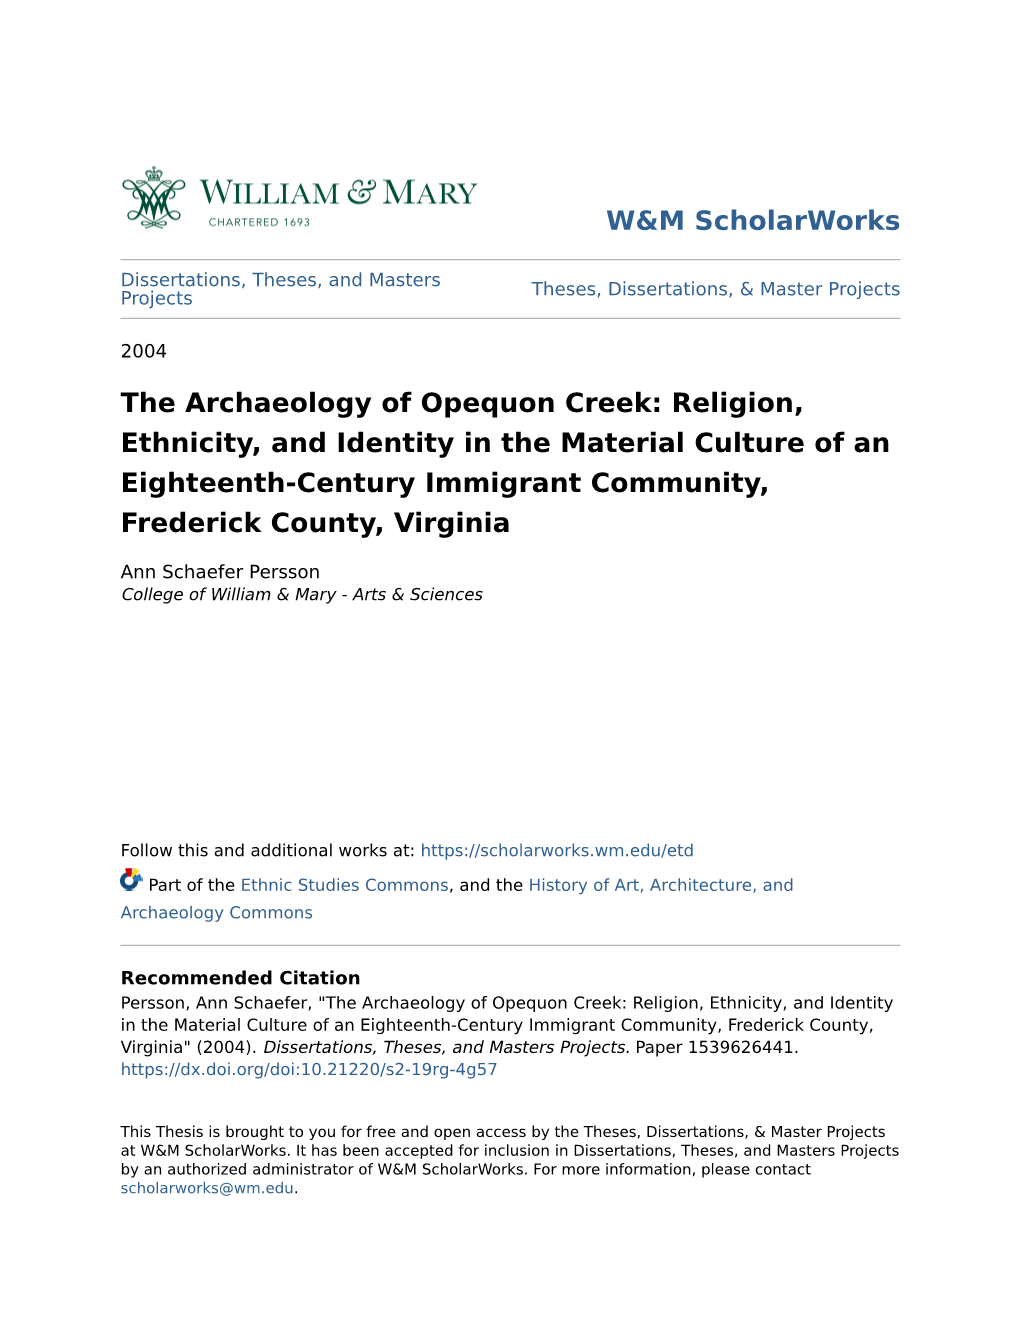 The Archaeology of Opequon Creek: Religion, Ethnicity, and Identity in the Material Culture of an Eighteenth-Century Immigrant Community, Frederick County, Virginia